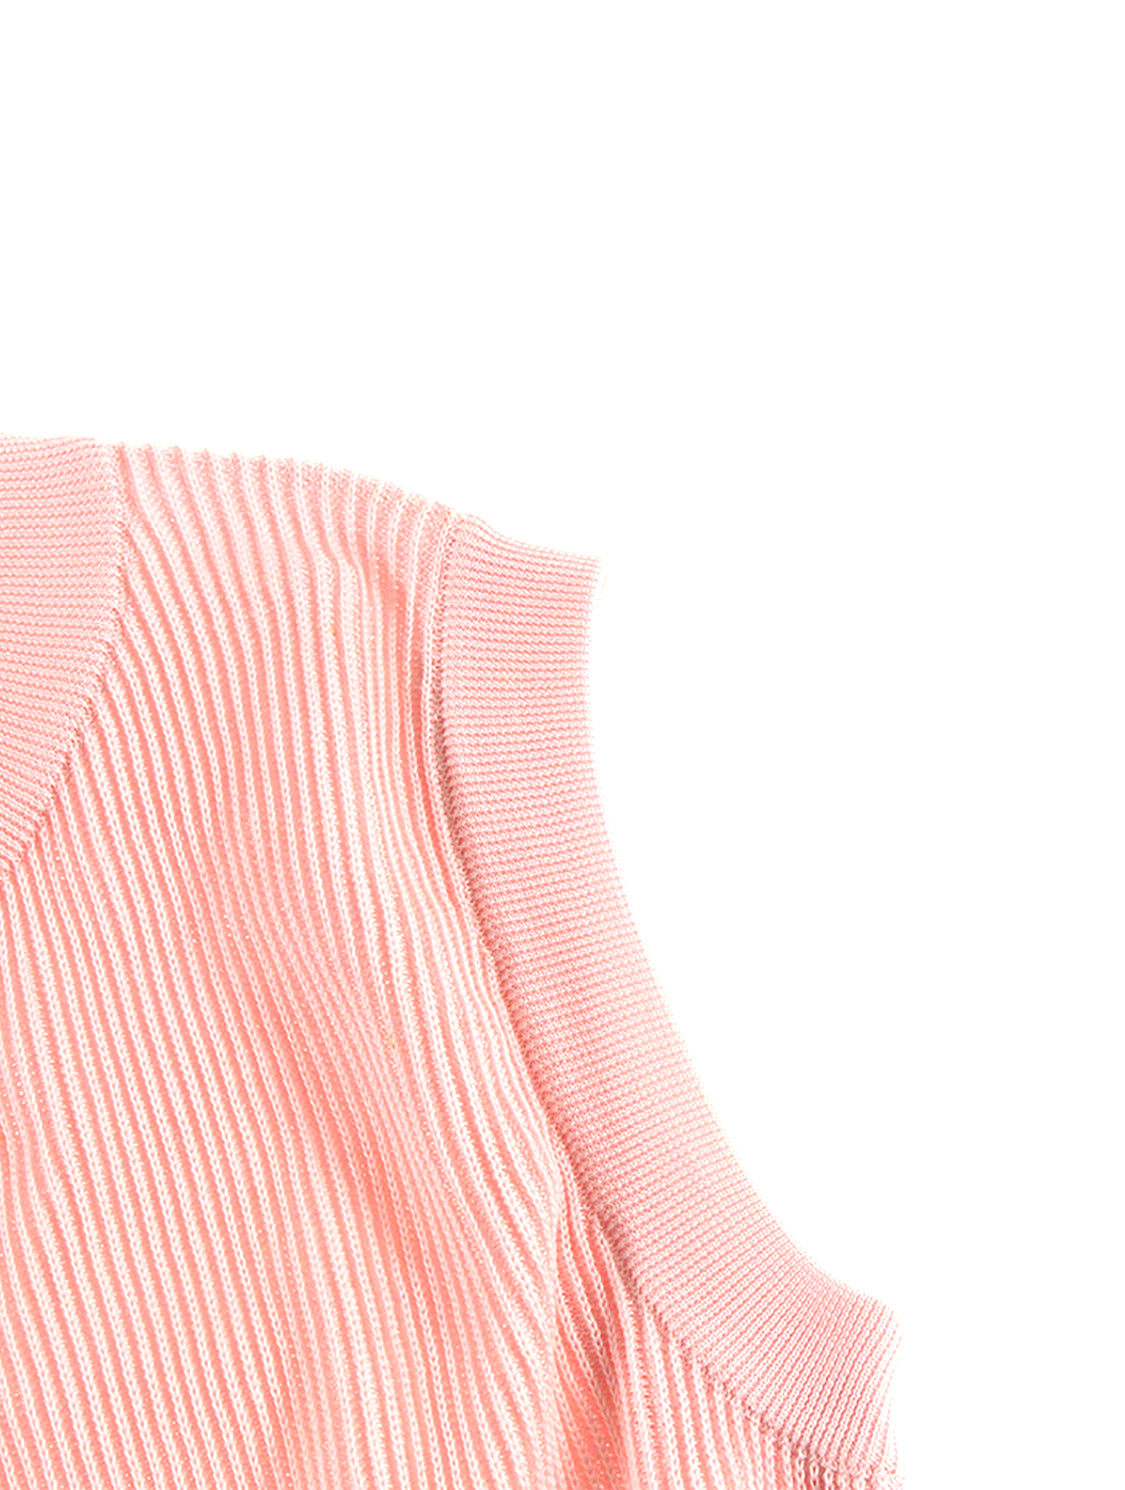 Chanel 2000s Pink Ribbed Knit Cardigan Vest